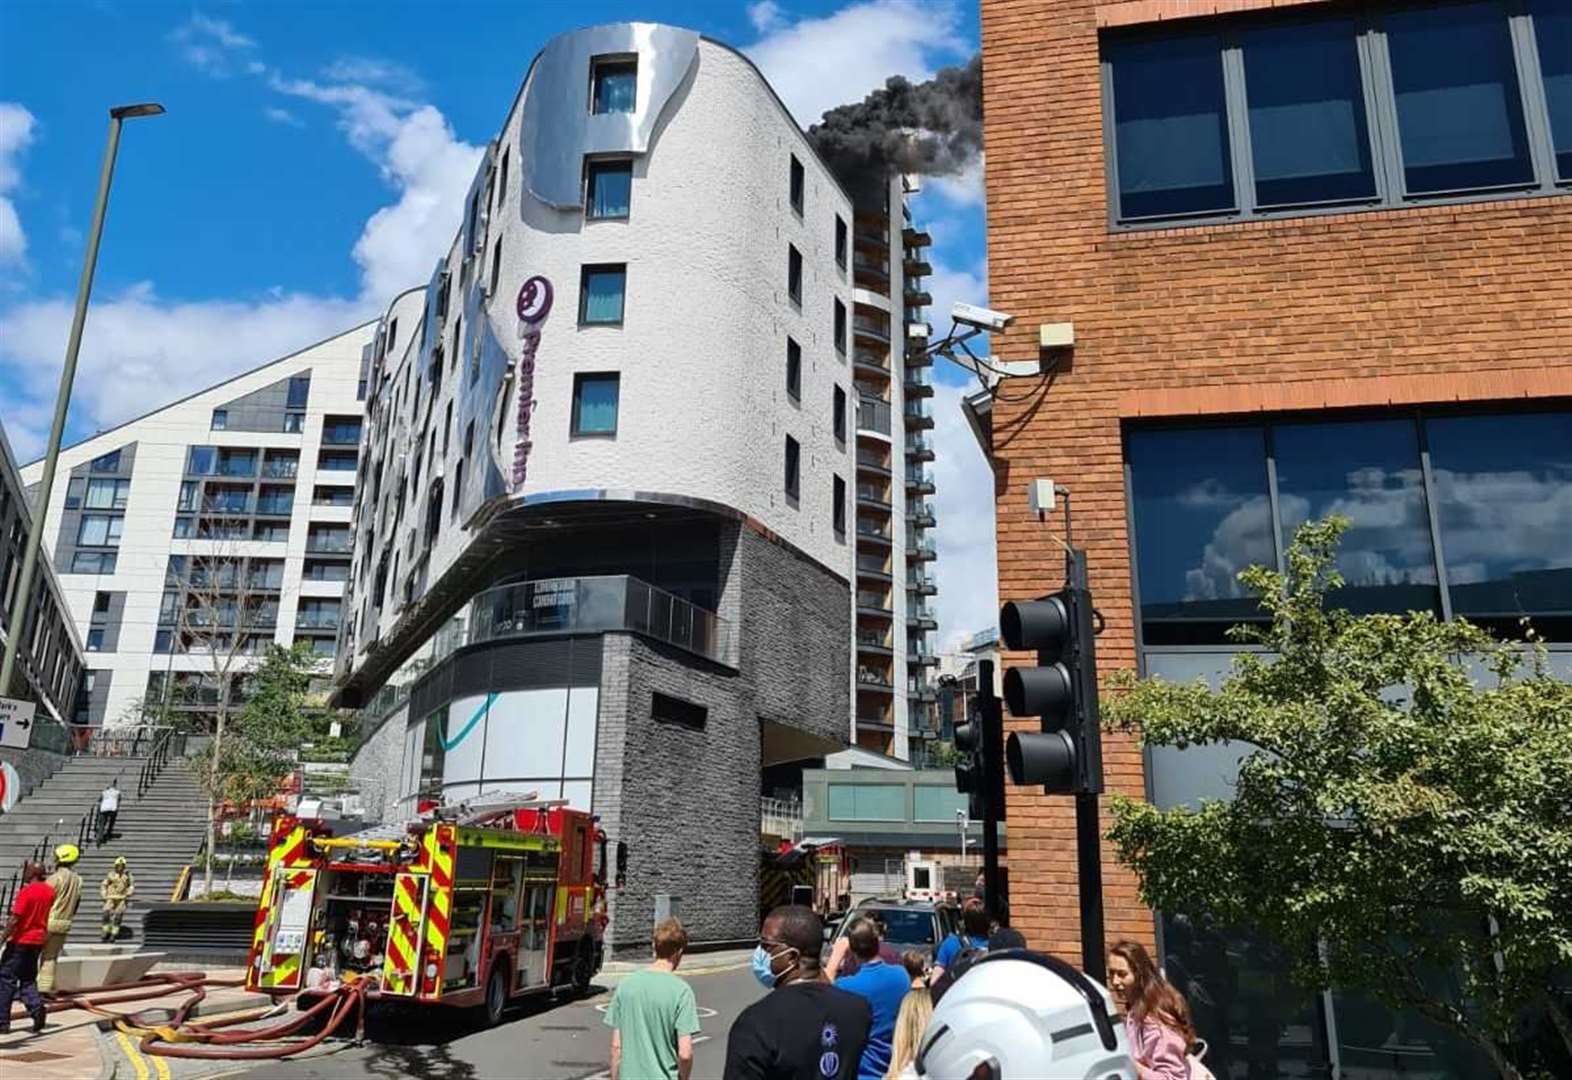 120 evacuated from tower block as 100 firefighters tackle blaze